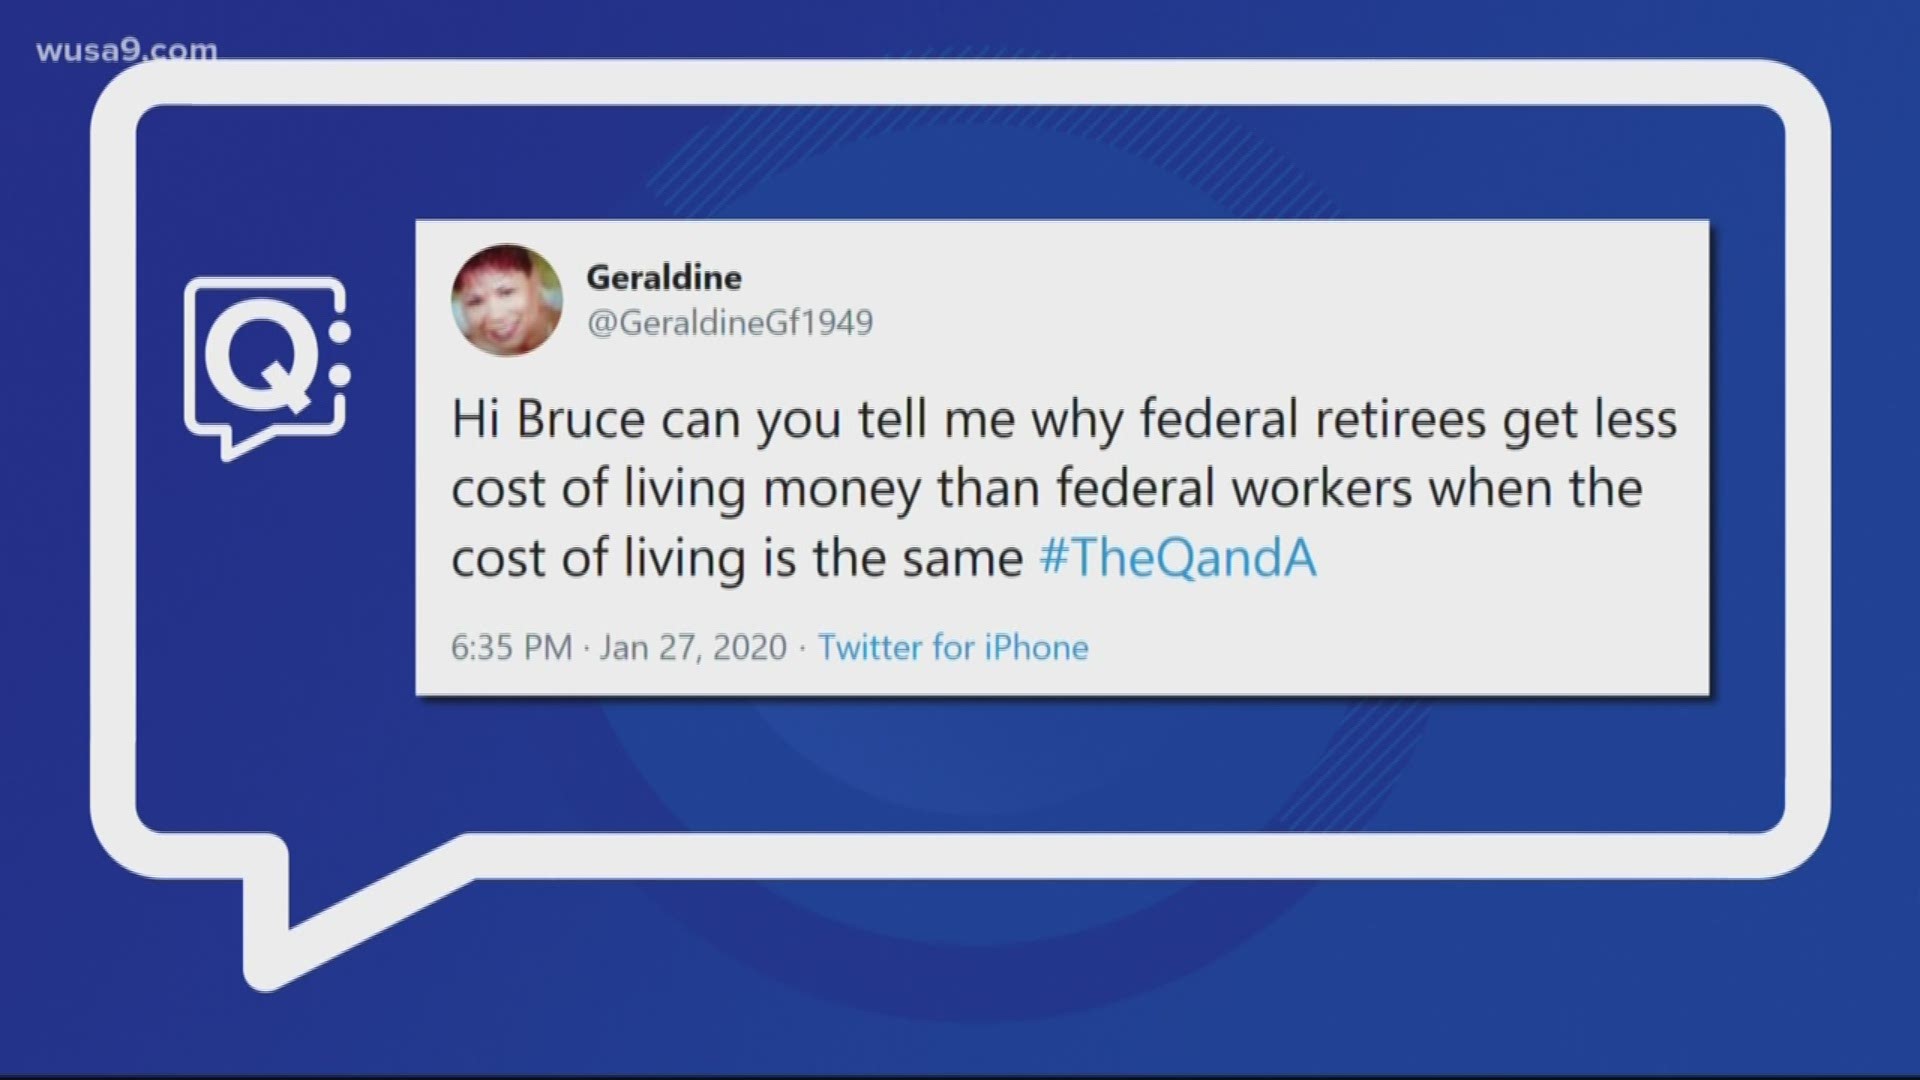 This year federal retirees received a 1.6% cost of living adjustment compared to the 3.1% pay rate increase that federal employees received. 
How is that fair?